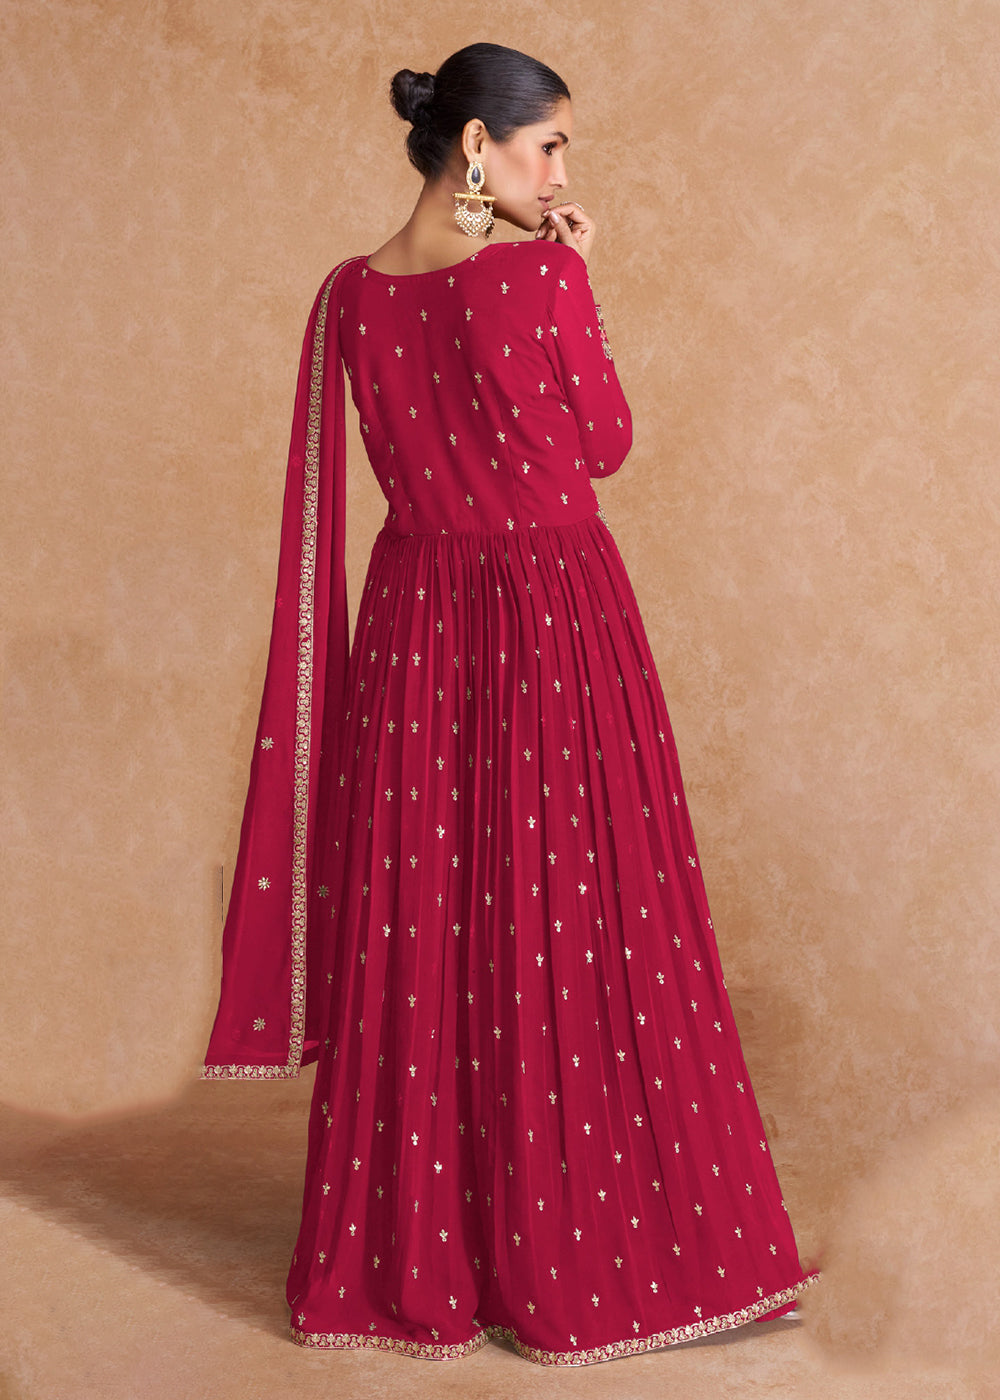 Buy Now Hot Pink Wedding Long Top Georgette Palazzo Salwar Suit Online in USA, UK, Canada, Germany, Australia & Worldwide at Empress Clothing.